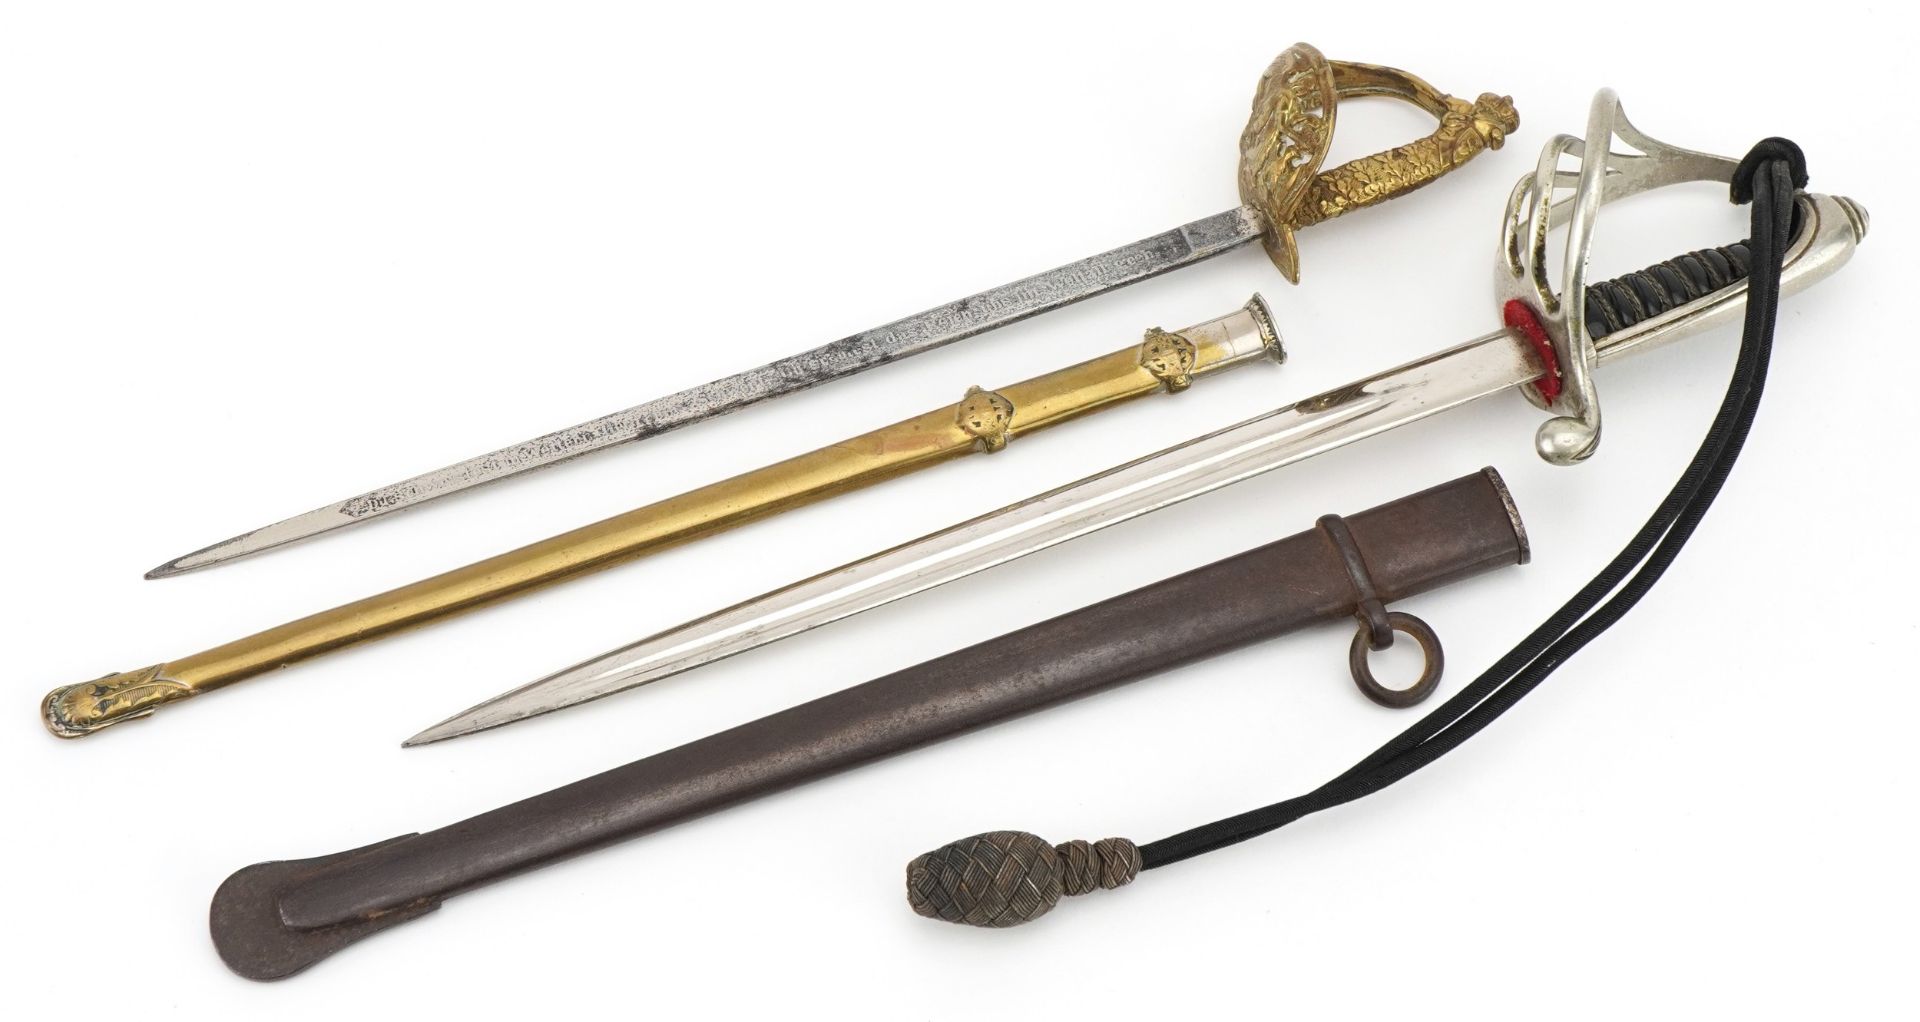 Two military interest letter openers in the form of miniature swords with scabbards including a